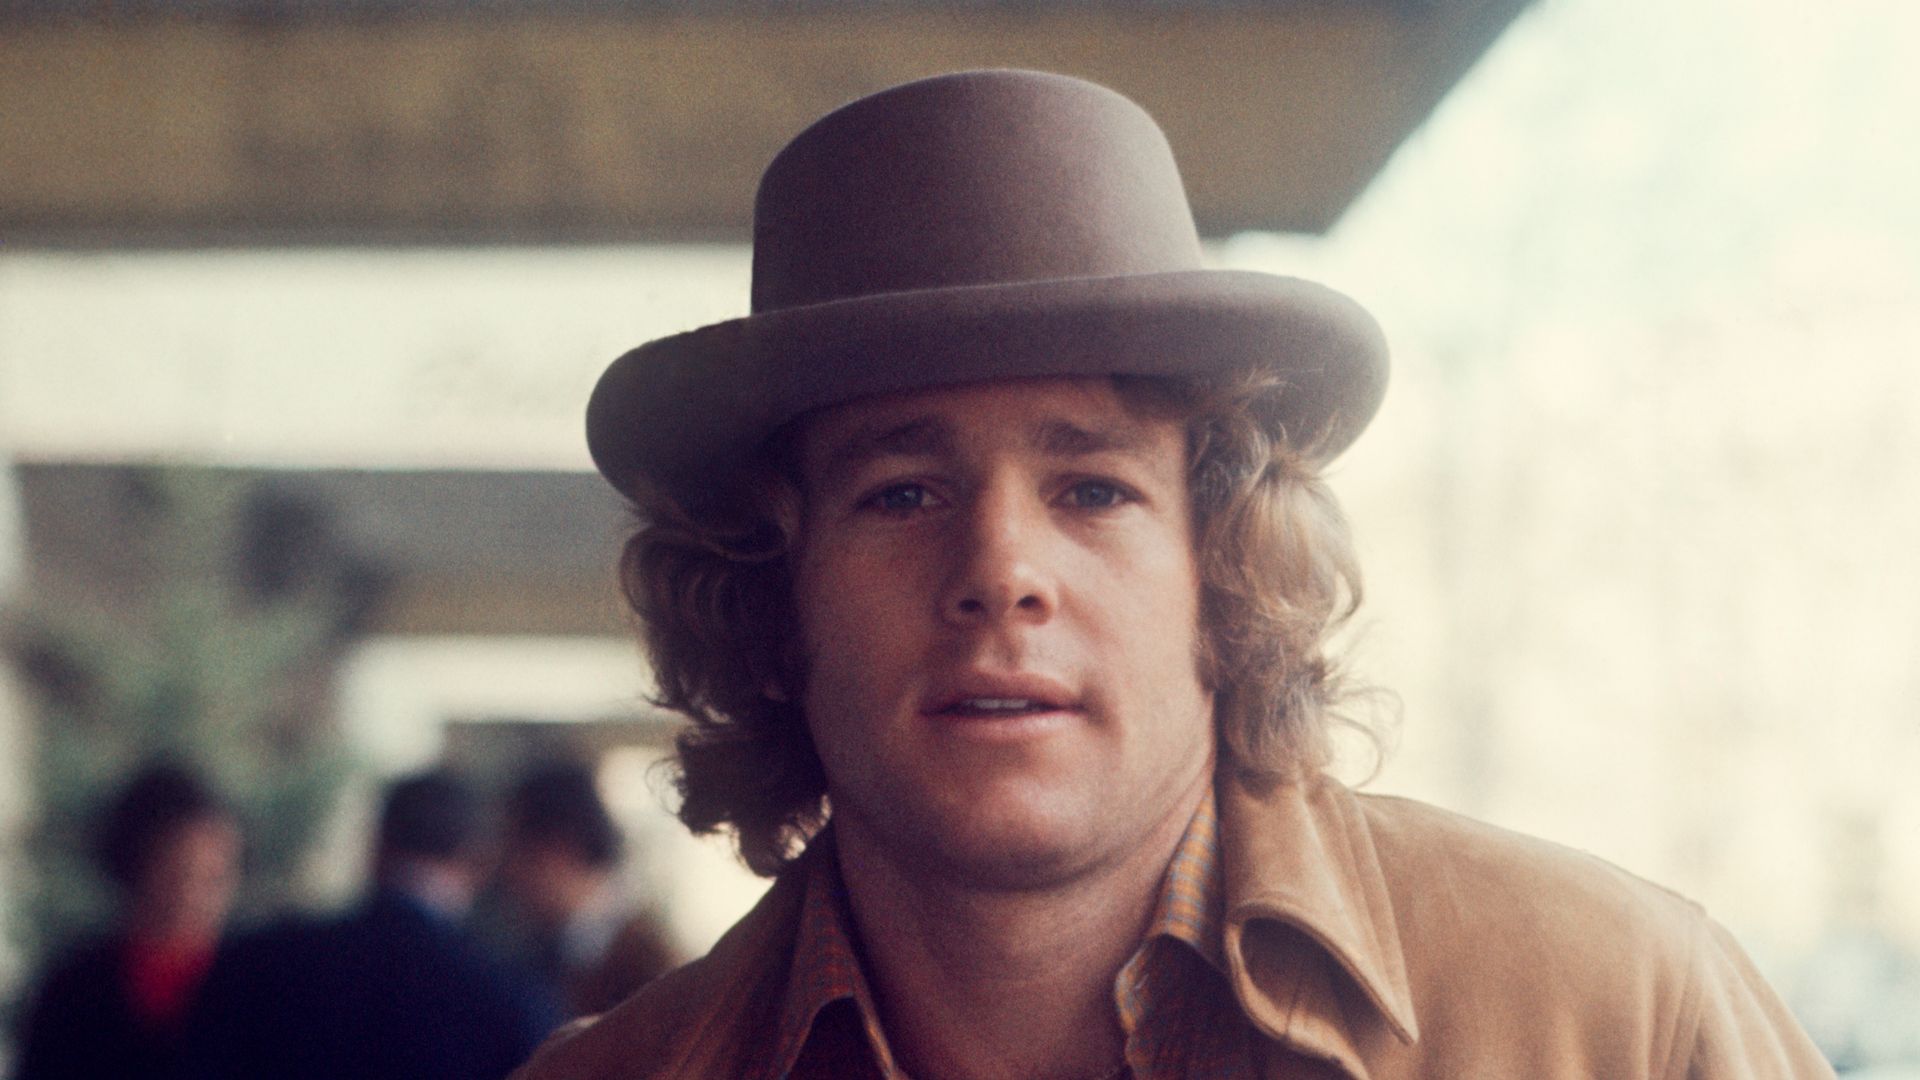 Ryan O'Neal in a hat and suede jacket; circa 1980